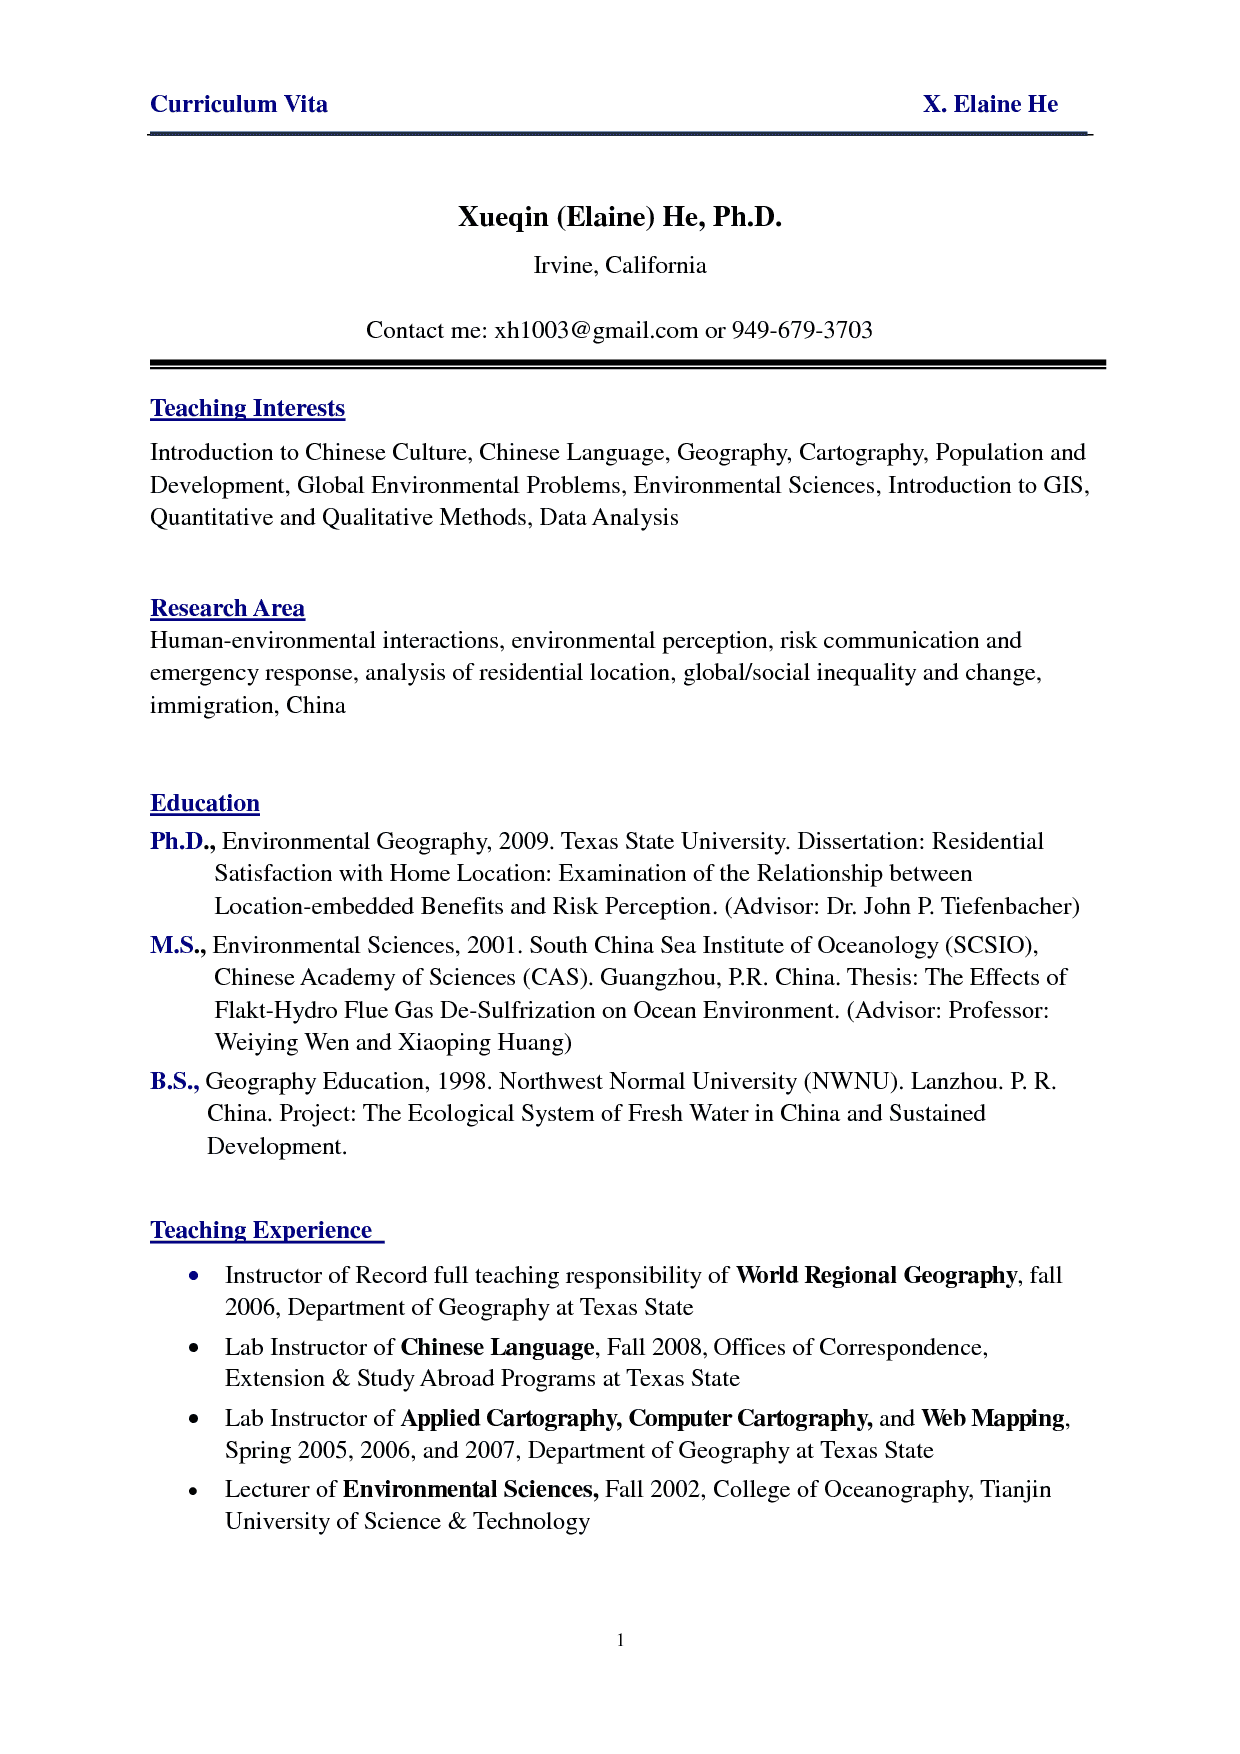 New Grad LPN Resume Sample (With images)